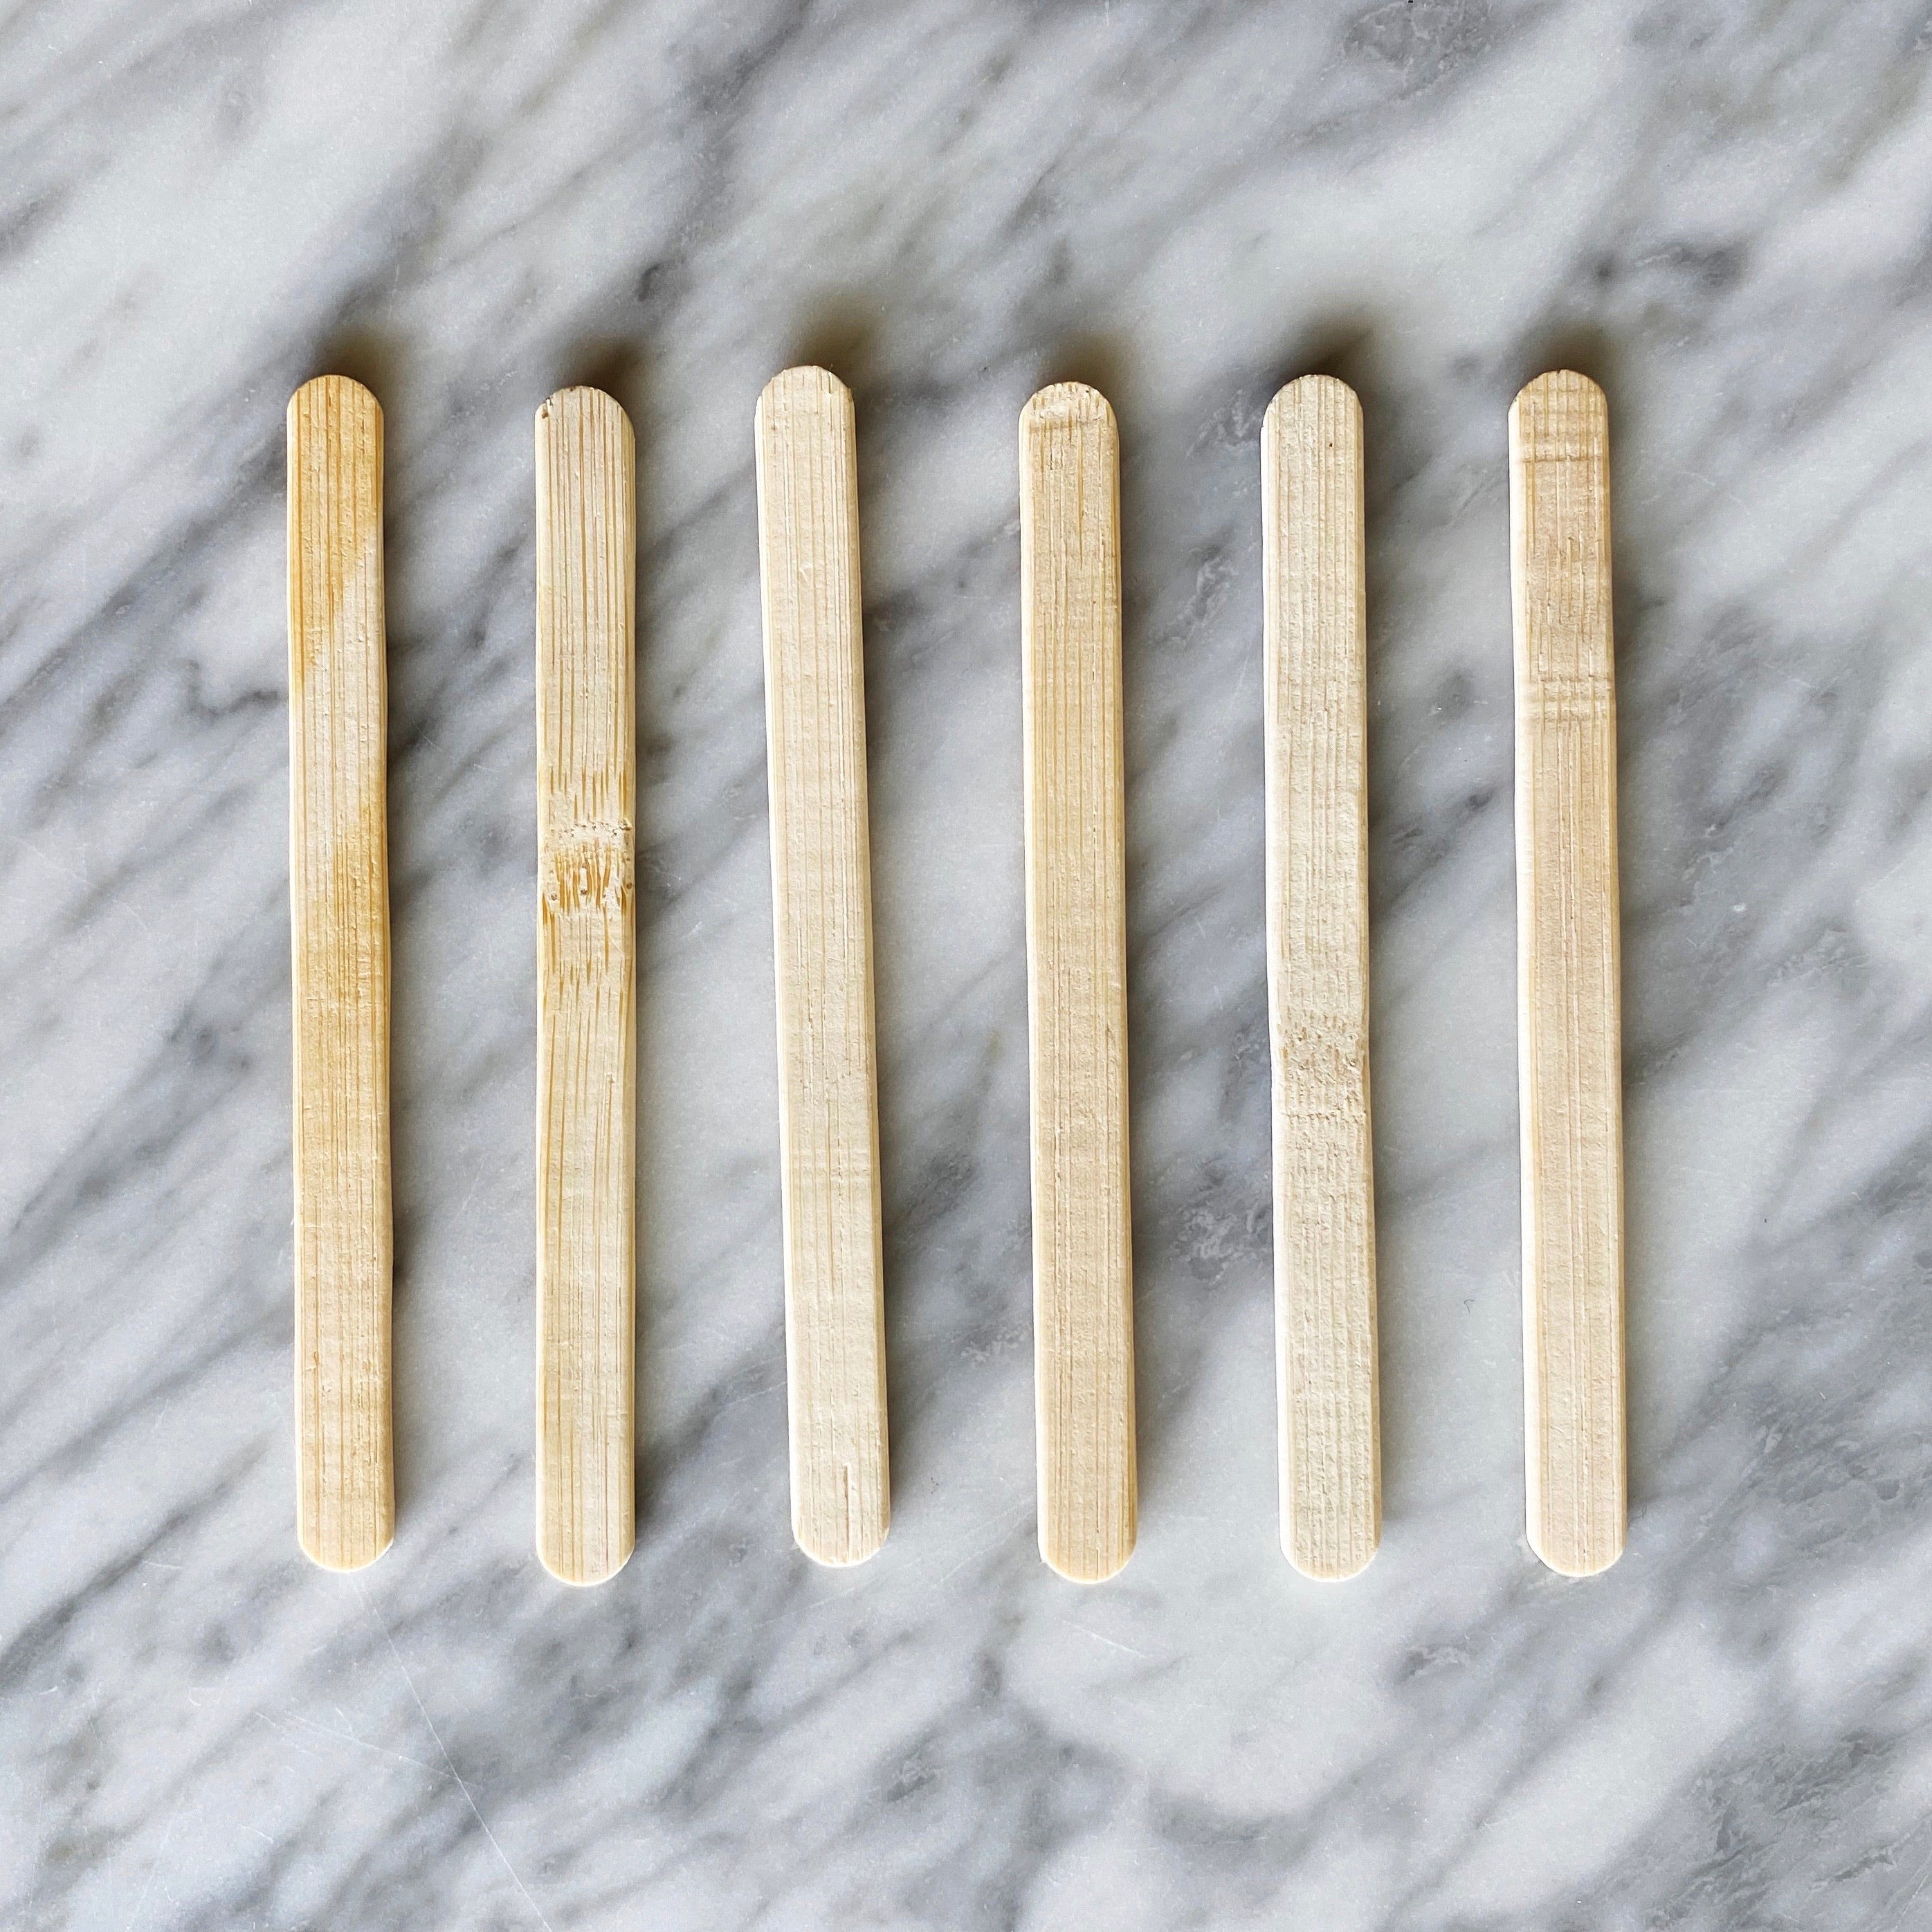 Ice Pop Mold Replacement Bamboo Popsicle Sticks